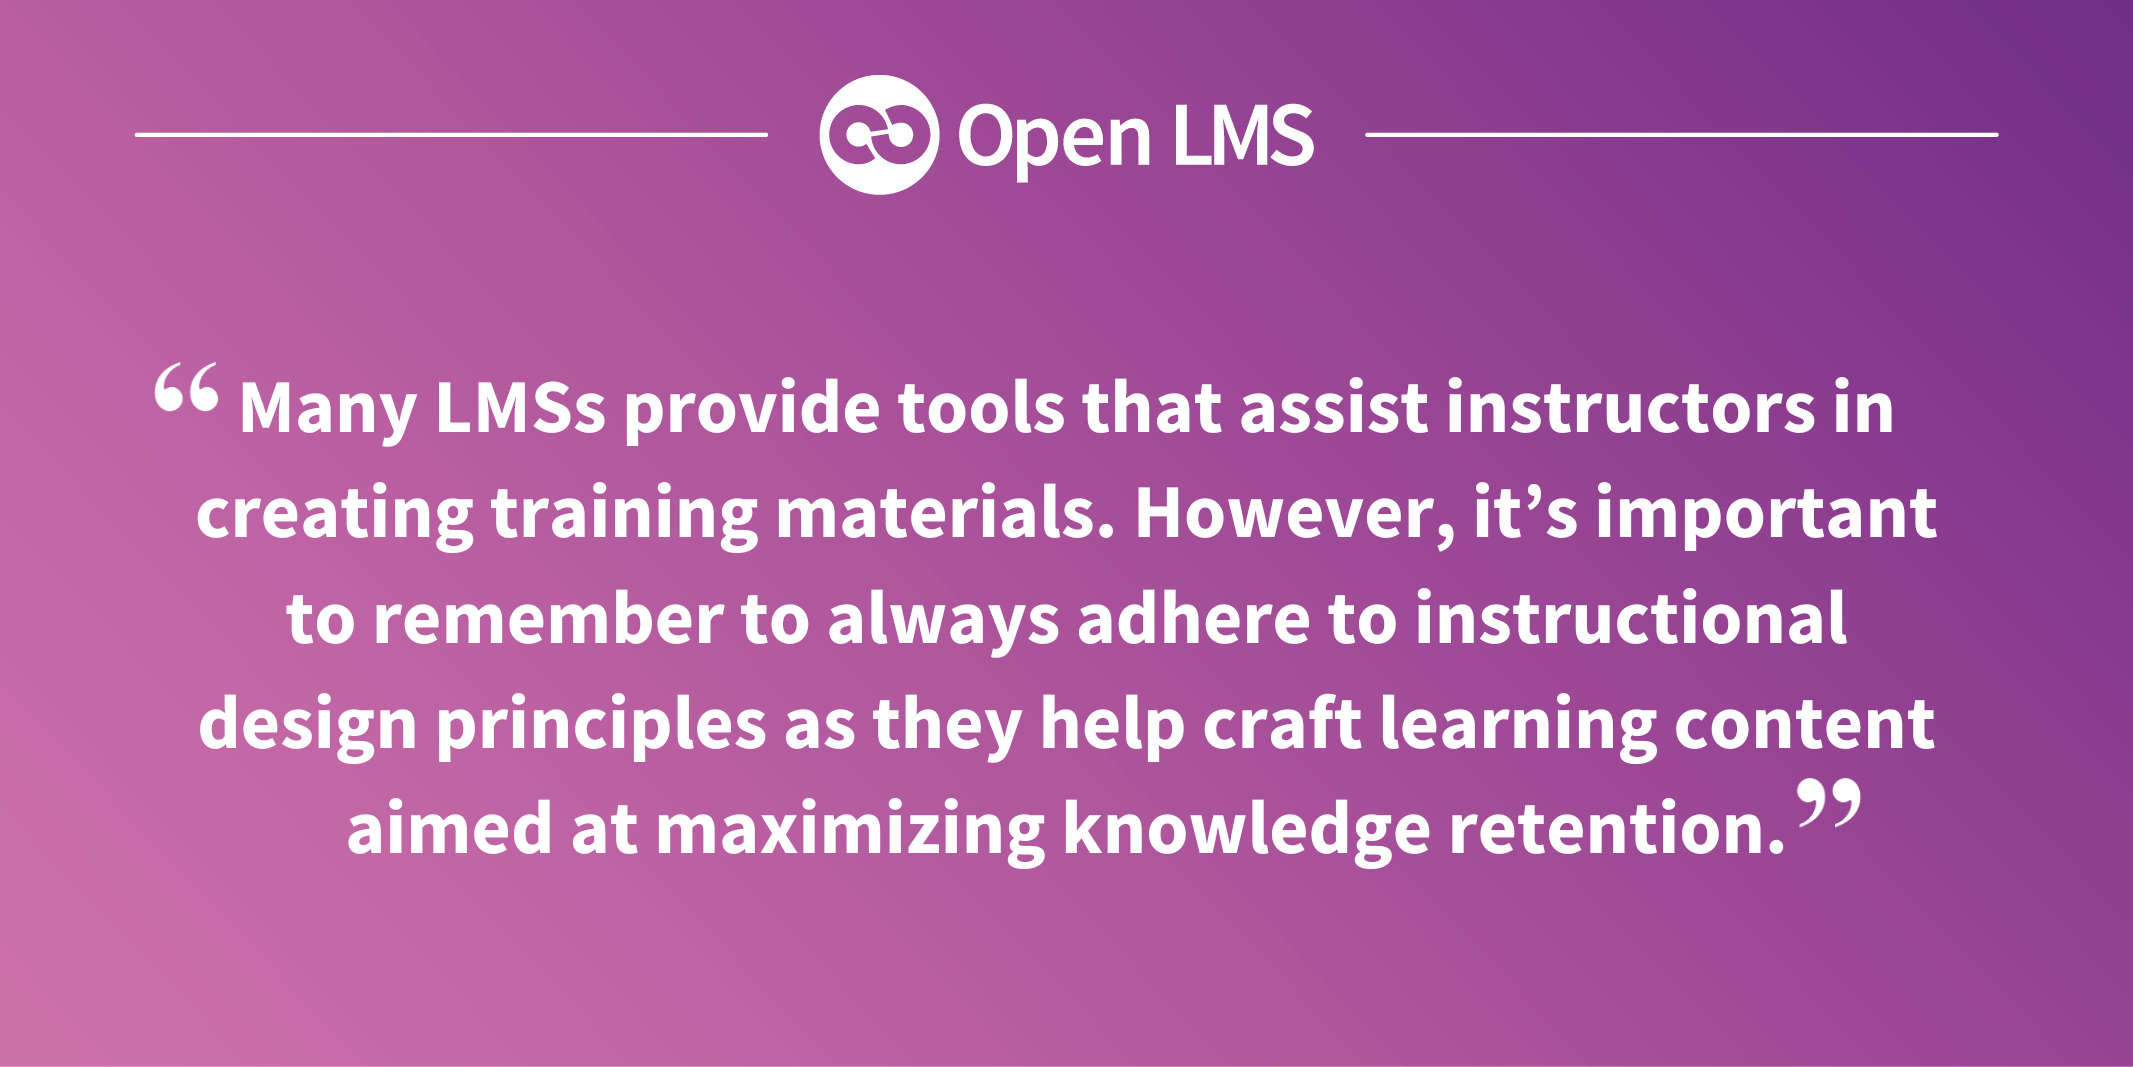 Many LMSs provide tools that assist instructors in creating training materials. However, it’s important to remember to always adhere to instructional design principles as they help craft learning content aimed at maximizing knowledge retention.